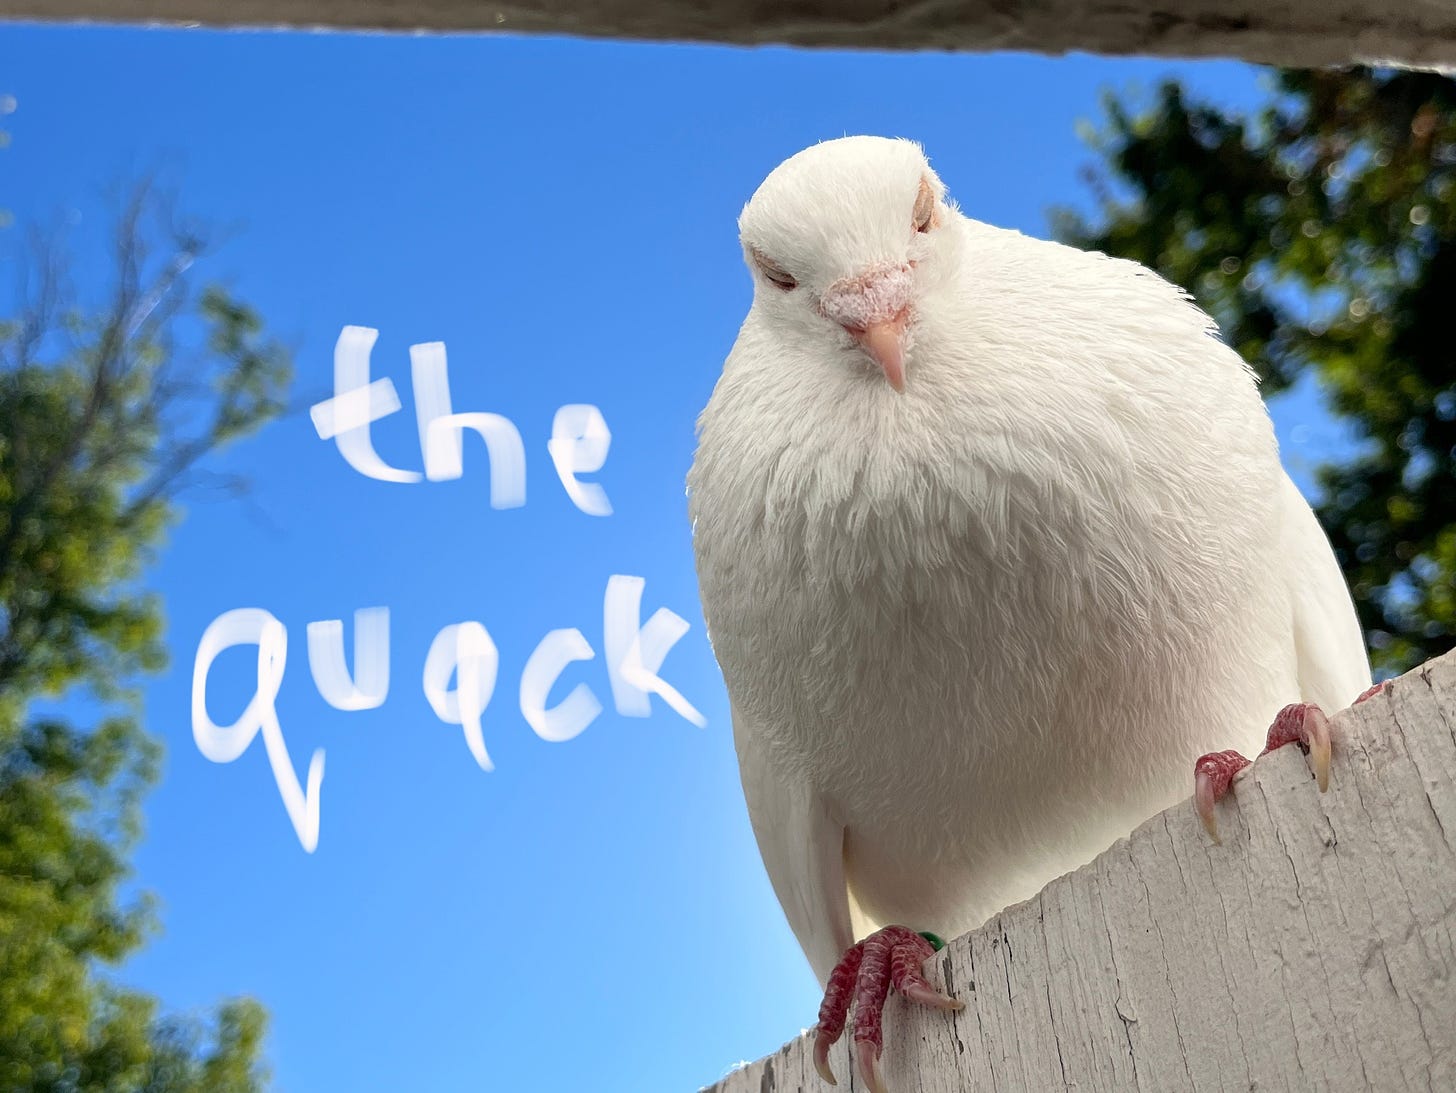 A white pigeon gazes down from the dop of my shed doorway. The words "the quack" are written in fluffy white letters against the bright blue sky